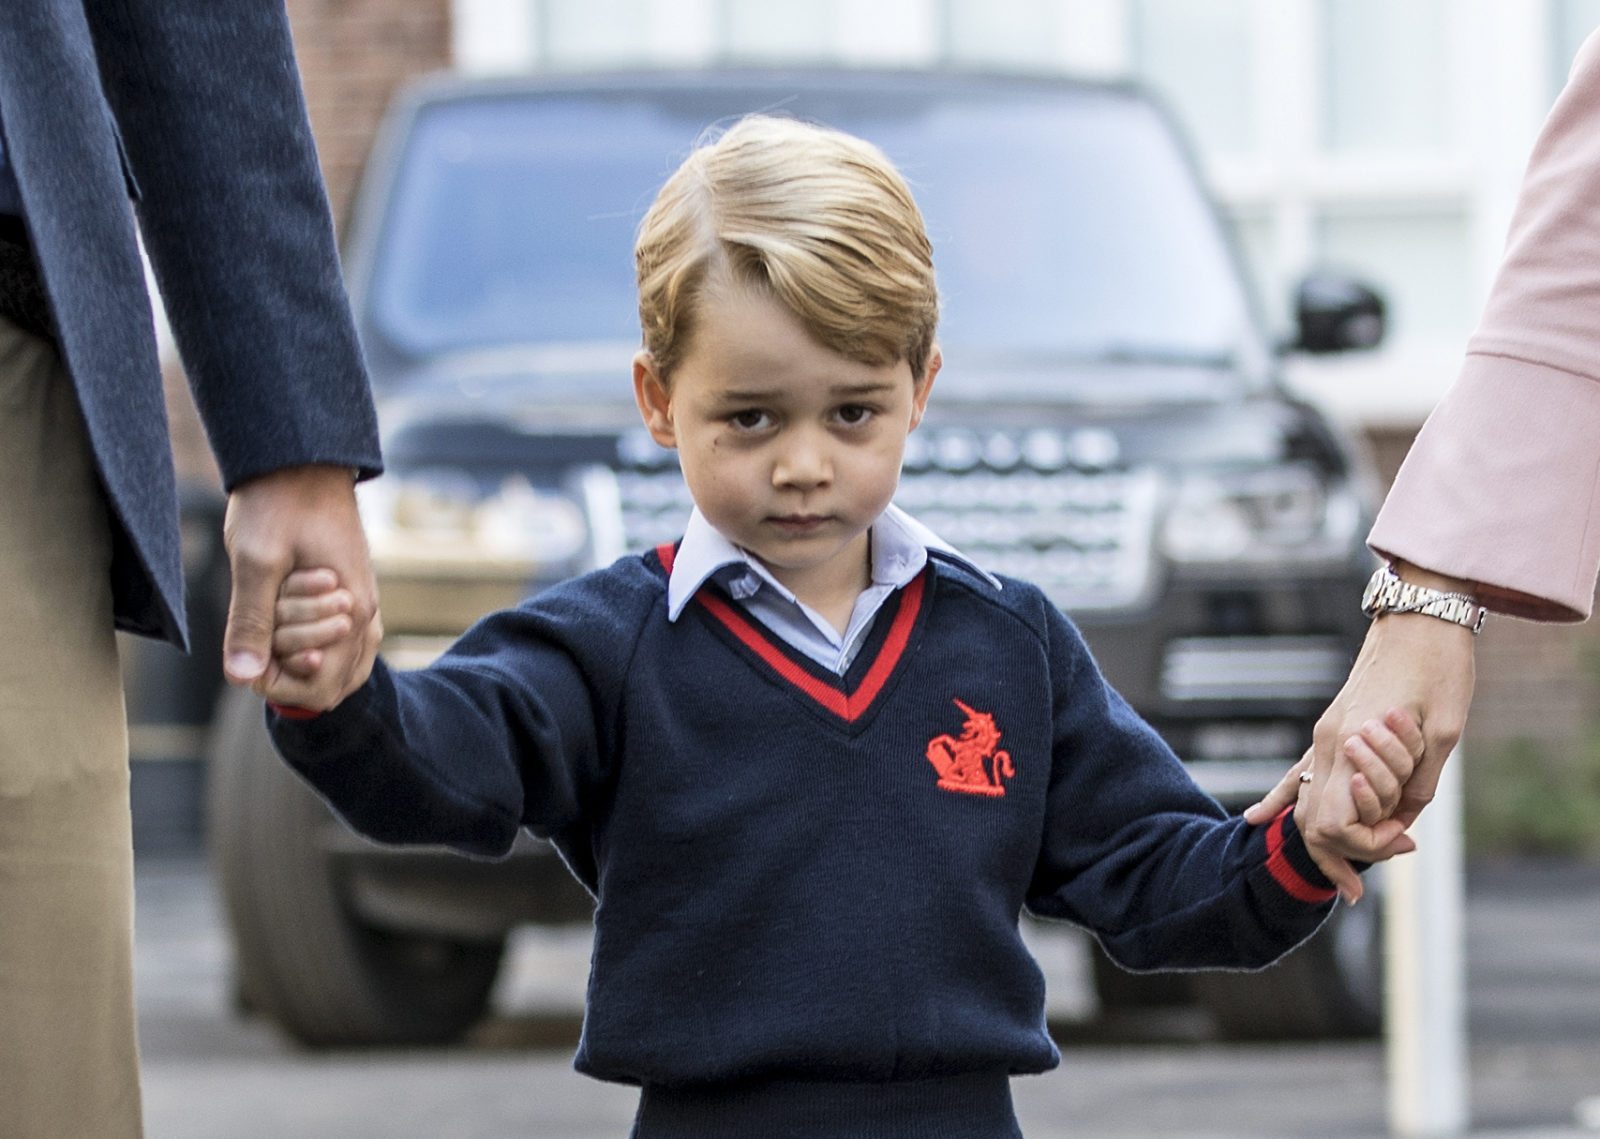 TOPSHOT - Britain's Prince George (C) accompanied by Britain's Prince William (L), Duke of Cambridge arrives for his first day of school at Thomas's school where he is met by Helen Haslem (R) head of the lower school in southwest London on September 7, 2017. / AFP PHOTO / POOL / RICHARD POHLE (Photo credit should read RICHARD POHLE/AFP/Getty Images)